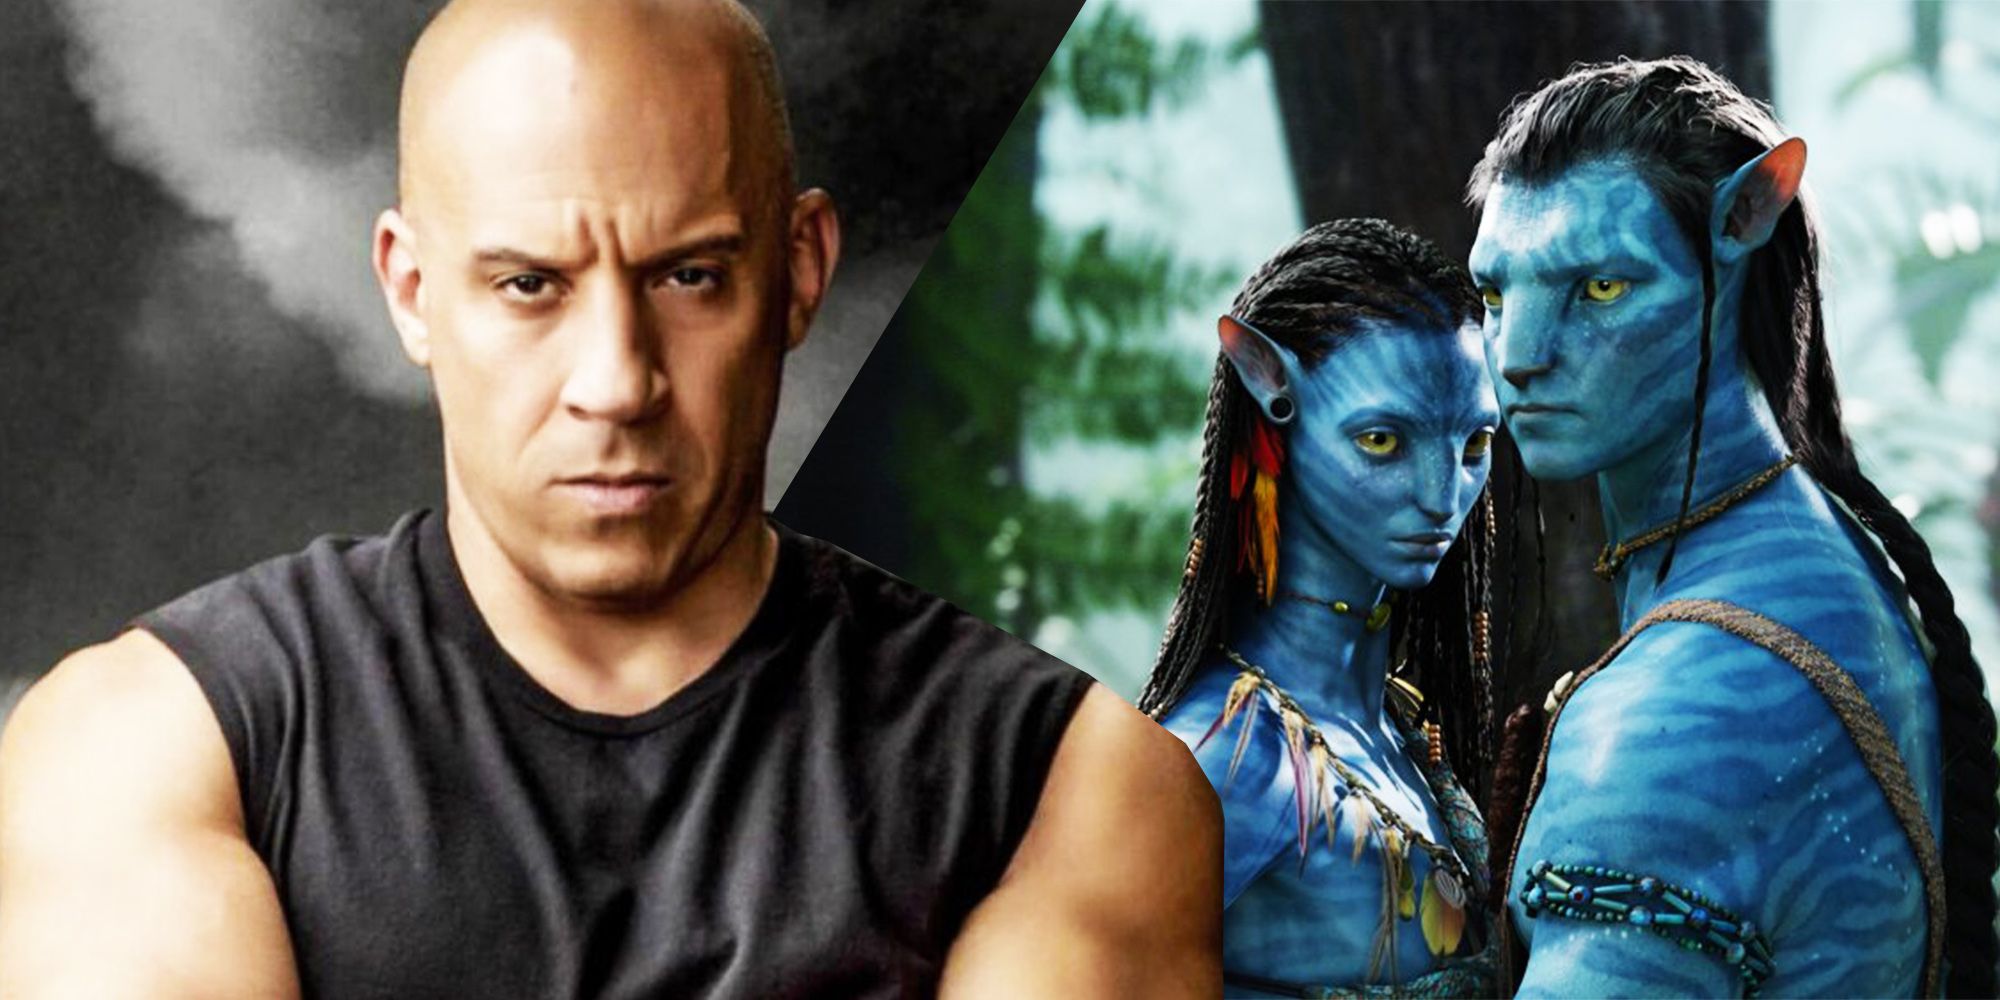 Vin Diesel's Dominic Toretto looks on at the cast of Avatar